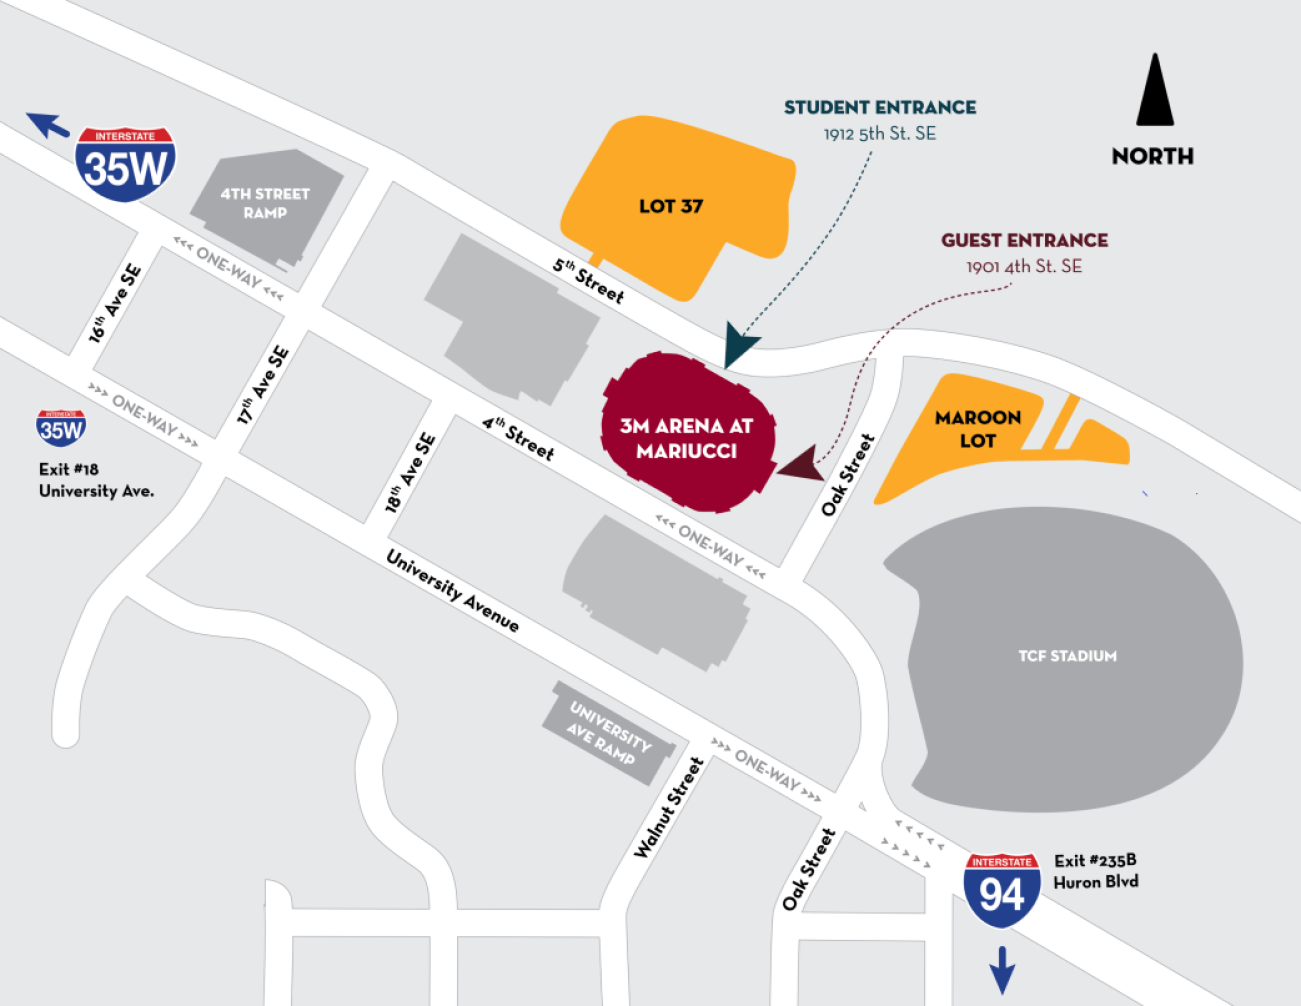 Map showing the location of Mariucci on the University of Minnesota campus, the student entrance is at 1912 5th St SE, the guest entrance is at 1901 4th St SE